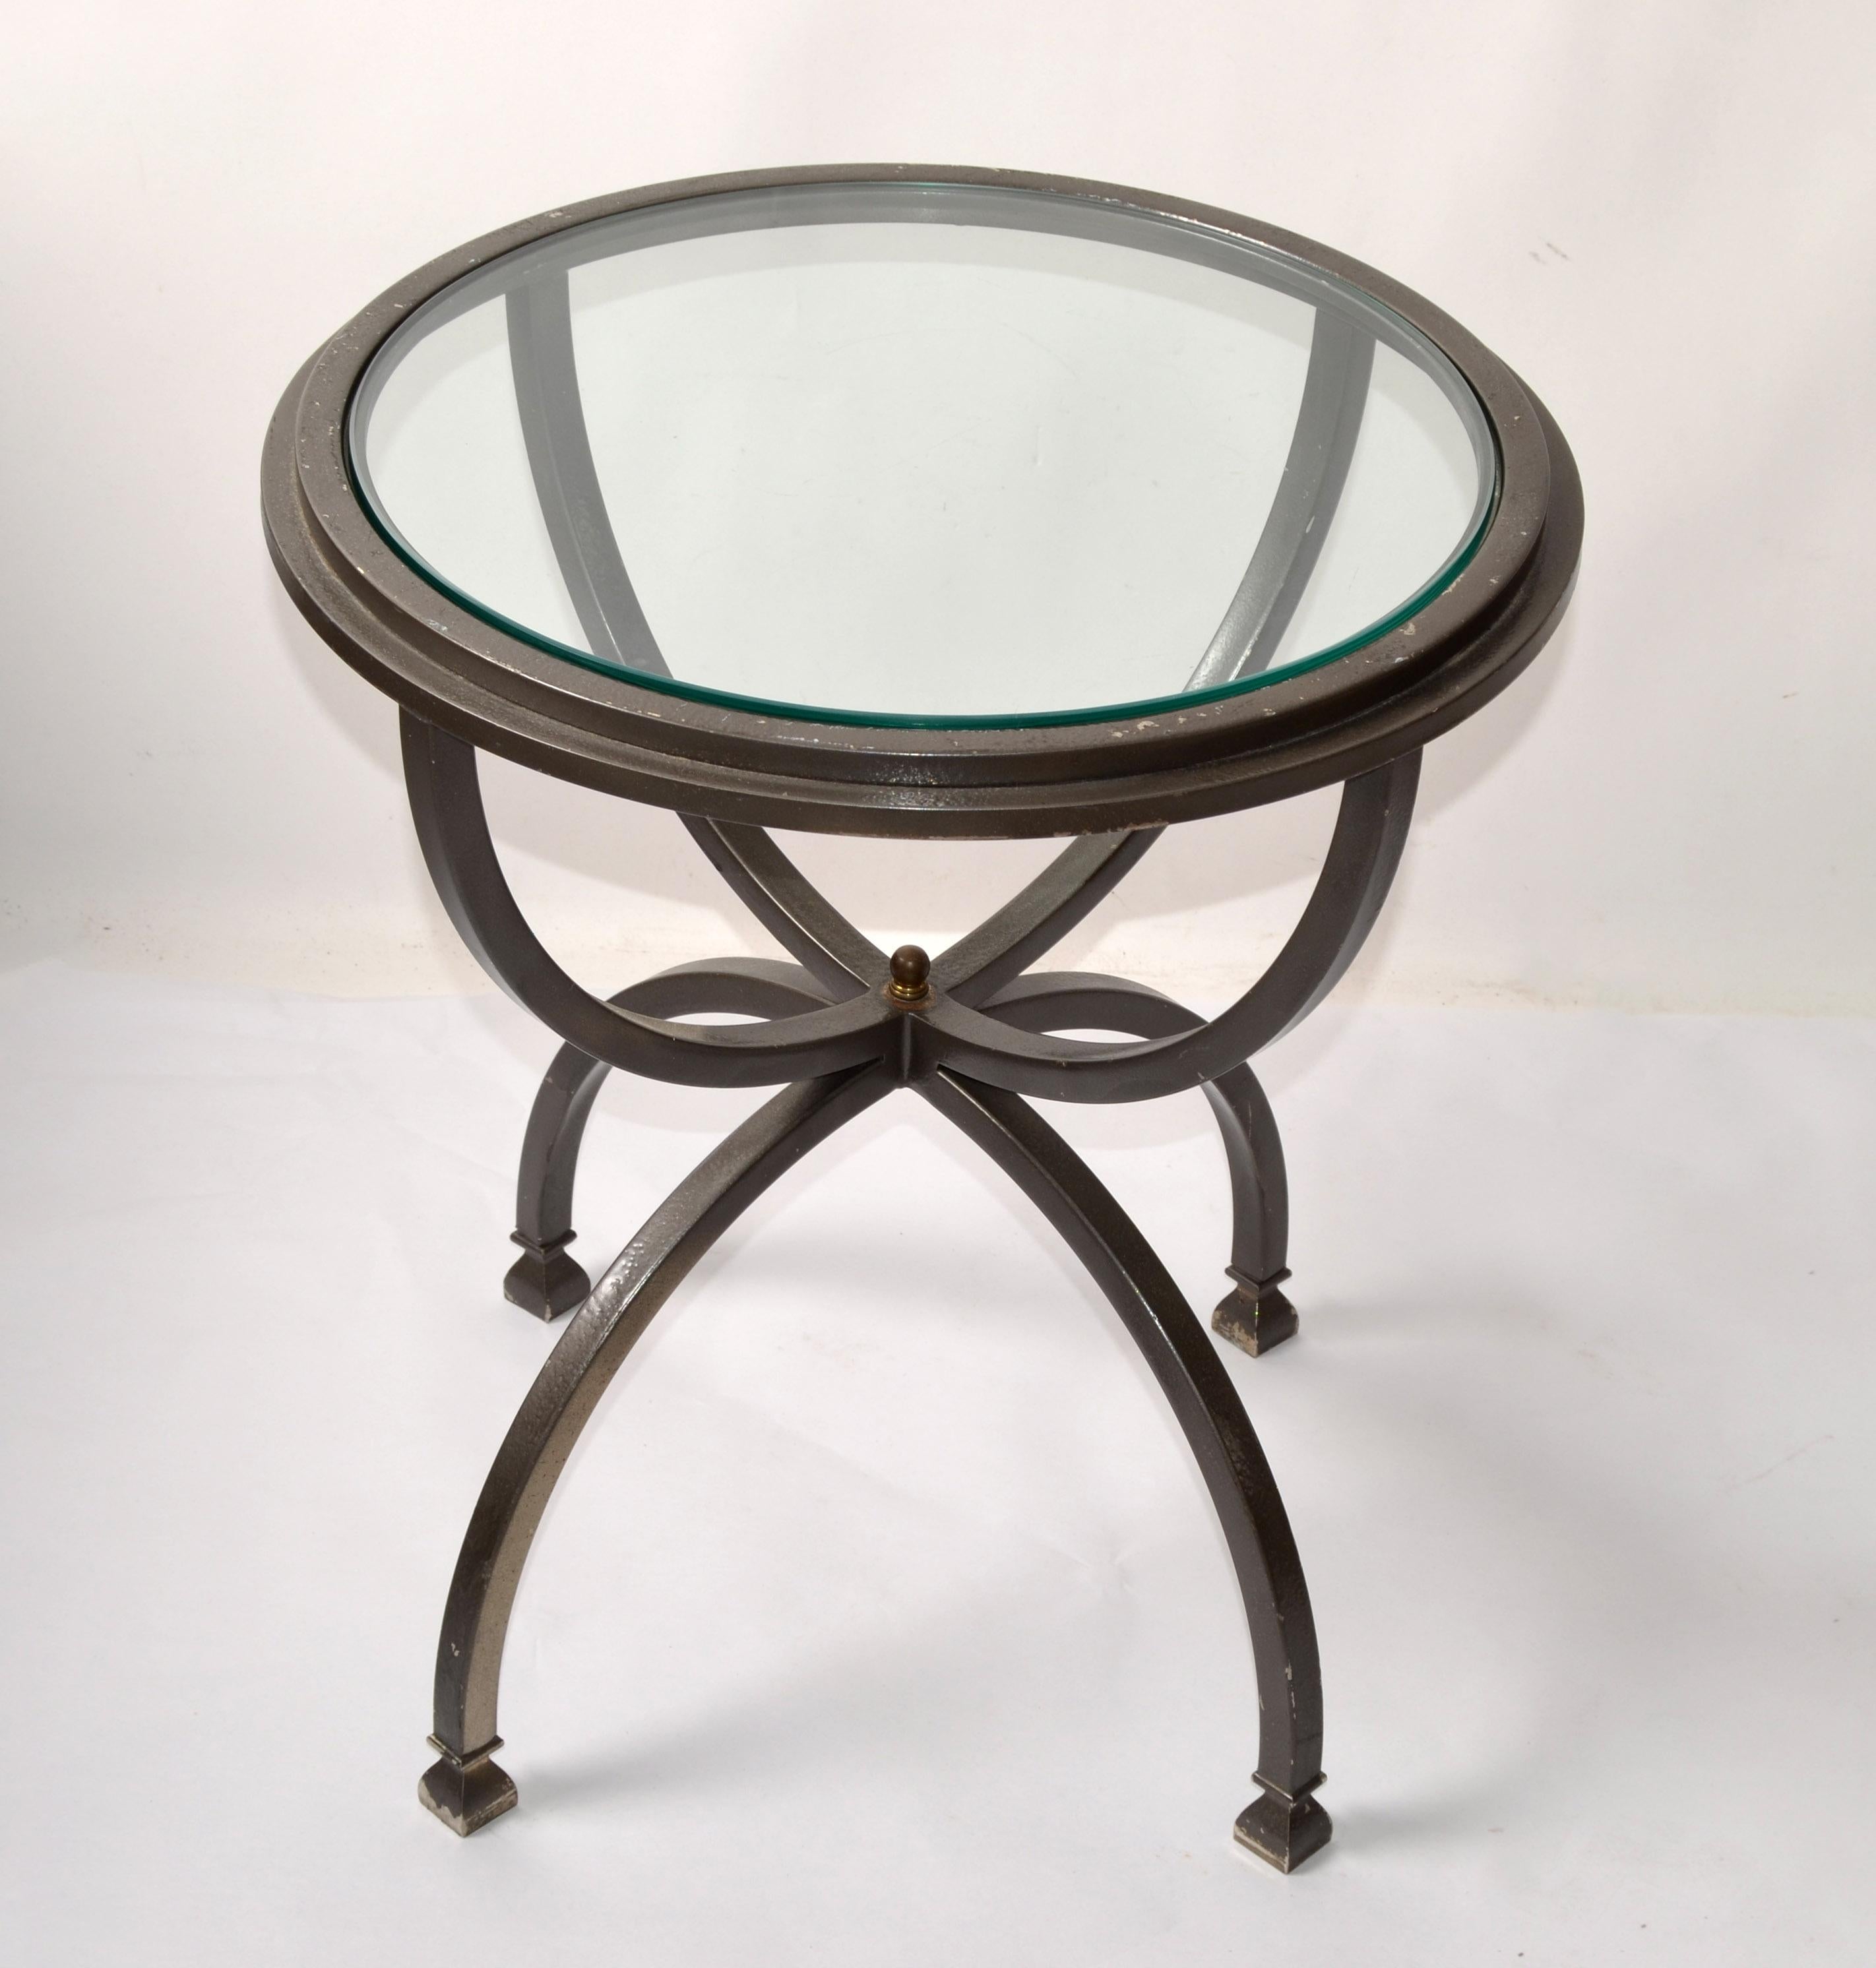 Mid-Century Modern French Maison Jansen Style Bend Steel Side, End or Drink Table with round Glass Top insert.
Brass Finial Decor at the Center where the sculptural Base and Top frame connects.
The dark silver-gray Finish has a distressed look and